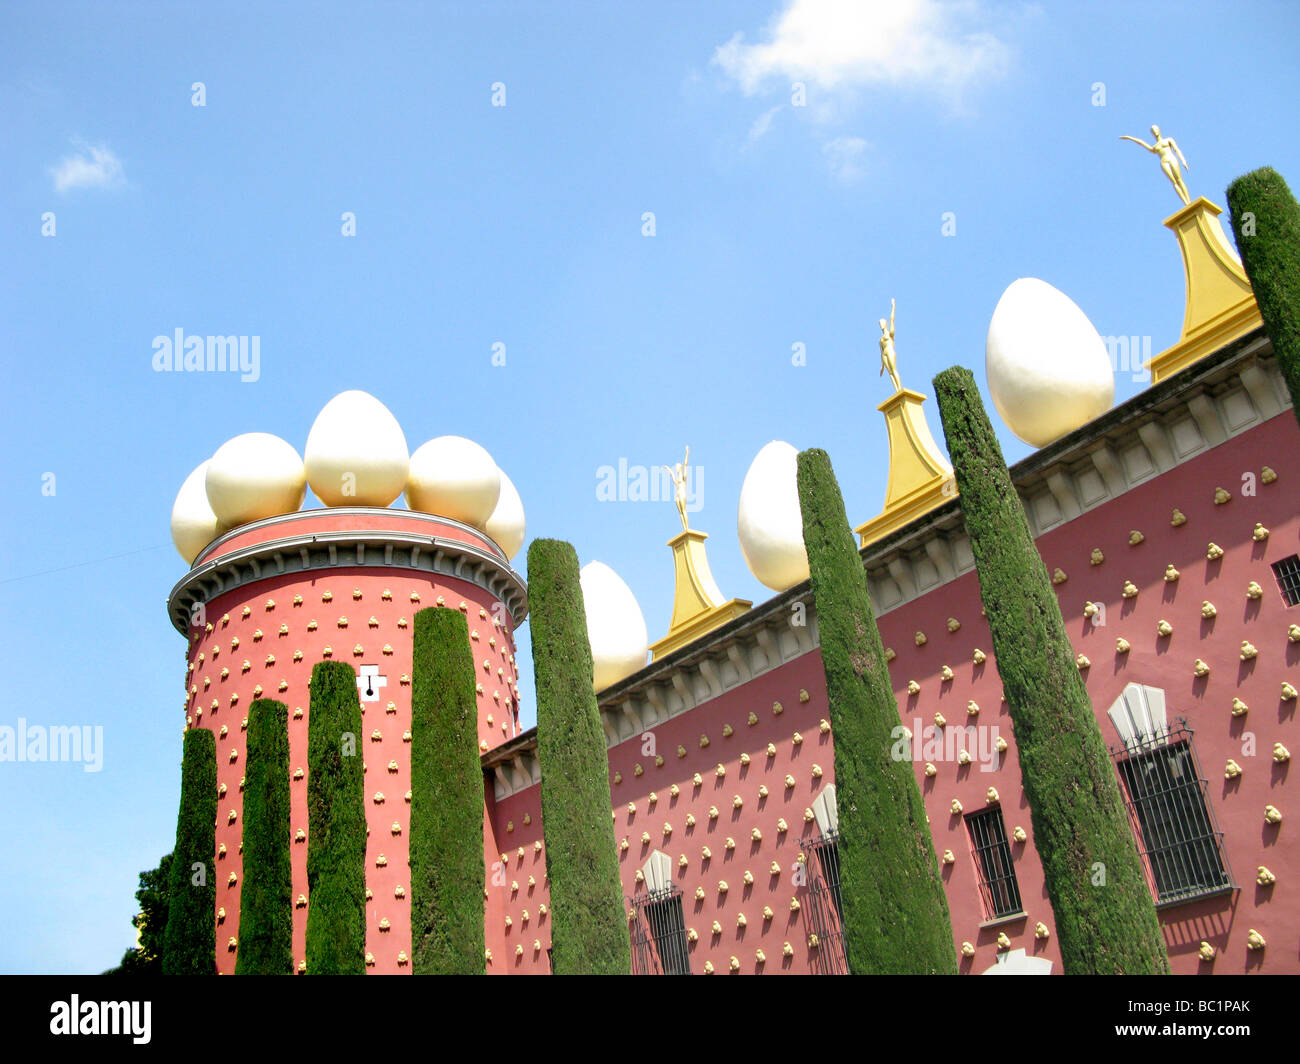 EXTERIOR VIEW OF SALVADORE DALI HOUSE MUSEUM FIGUERES SPAIN Stock Photo